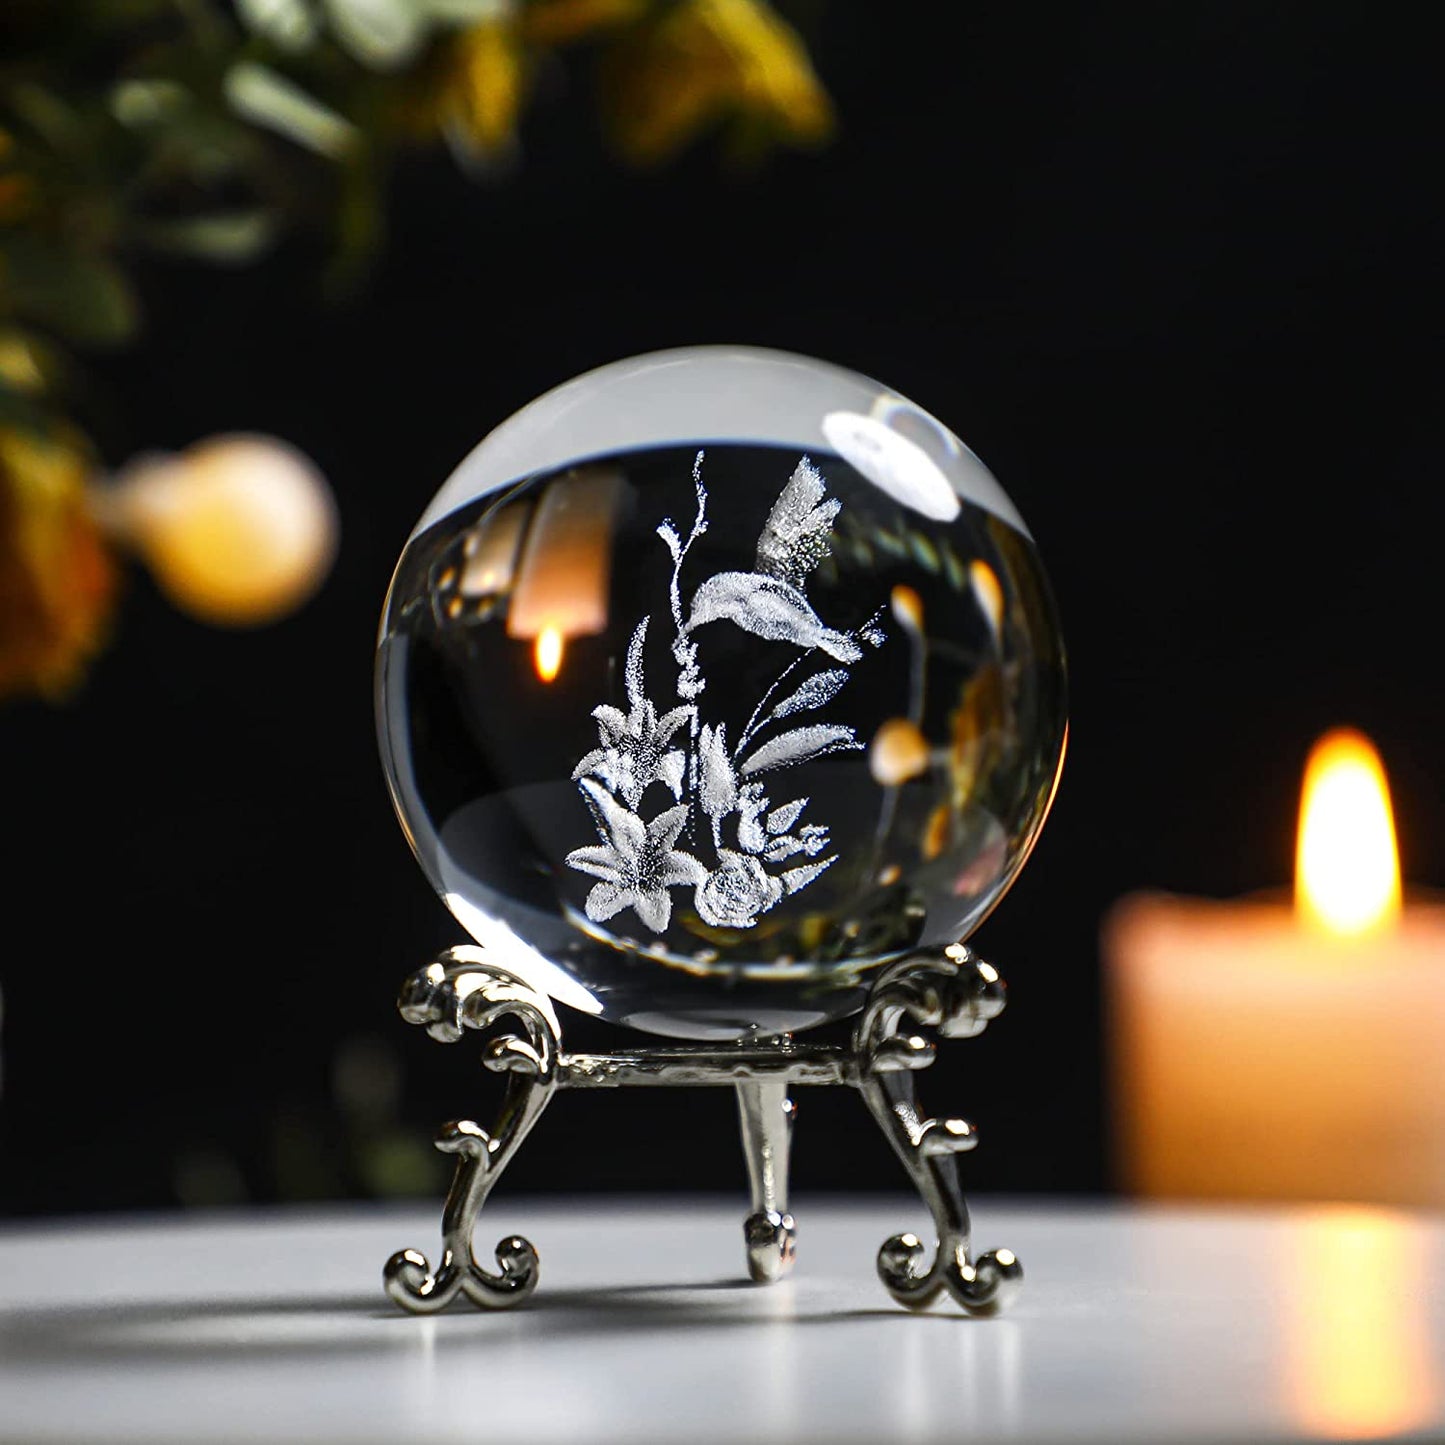 3D Hummingbird Crystal Ball Paperweight 60mm(2.3Inch) Laser Engraved Glass Sphere Display Globe Meditation Ball Home Decor with Metal Stand